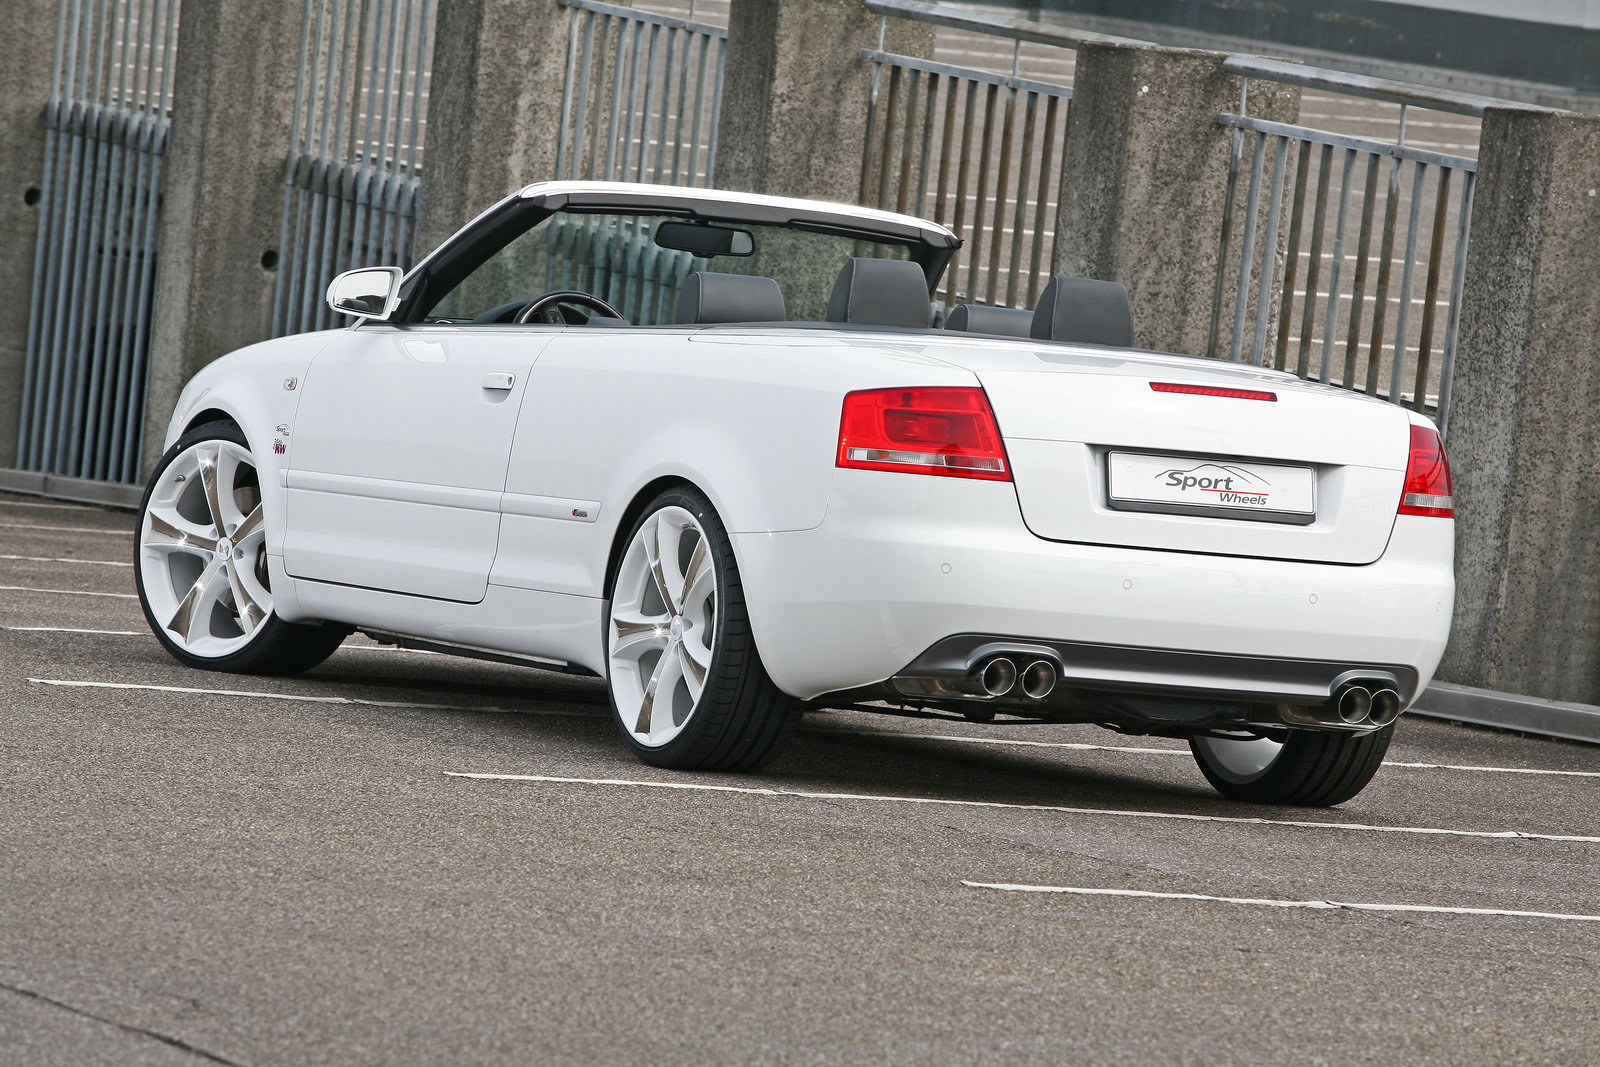 Audi Convertible on Audi A4 Convertible Gets A Complete Tuning Package From Sport Wheels